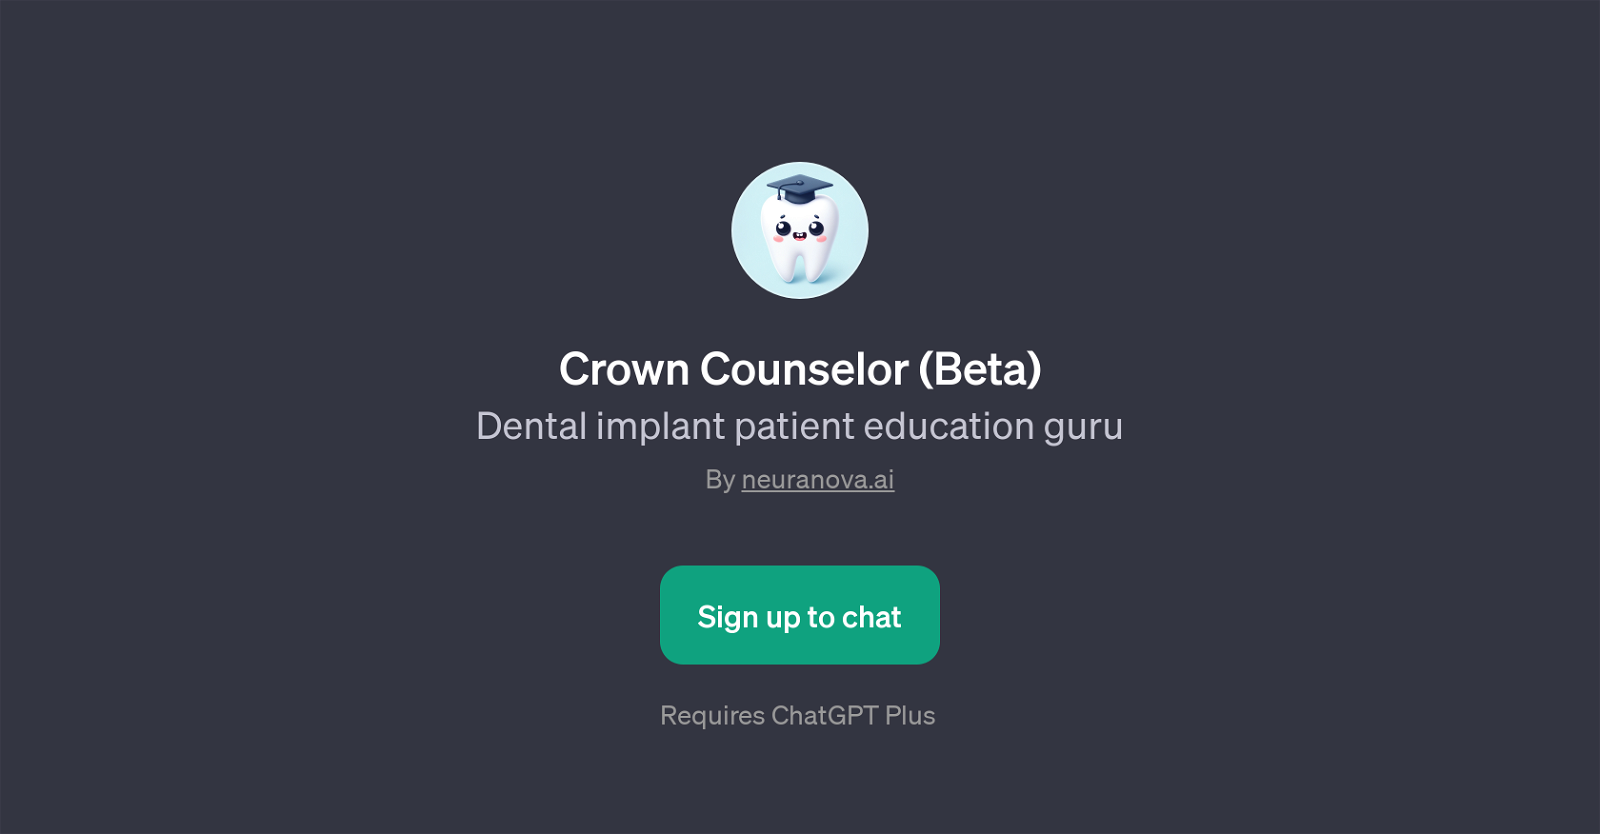 Crown Counselor website